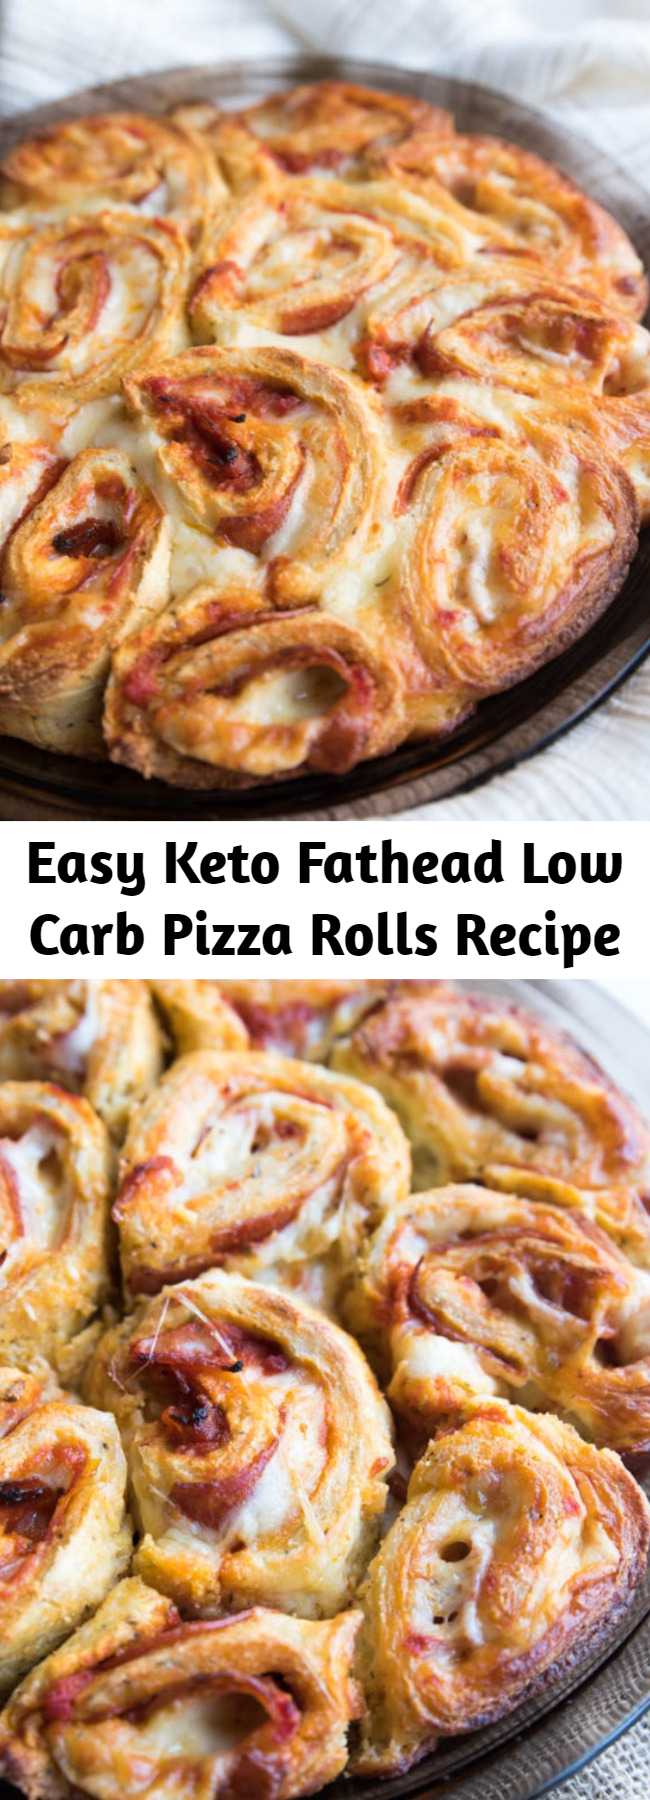 Easy Keto Fathead Low Carb Pizza Rolls Recipe - These are THE BEST KETO FATHEAD LOW CARB PIZZA ROLLS you will have taste! The texture is pretty amazing considering they are grain free, gluten free, nut free and low carb! 